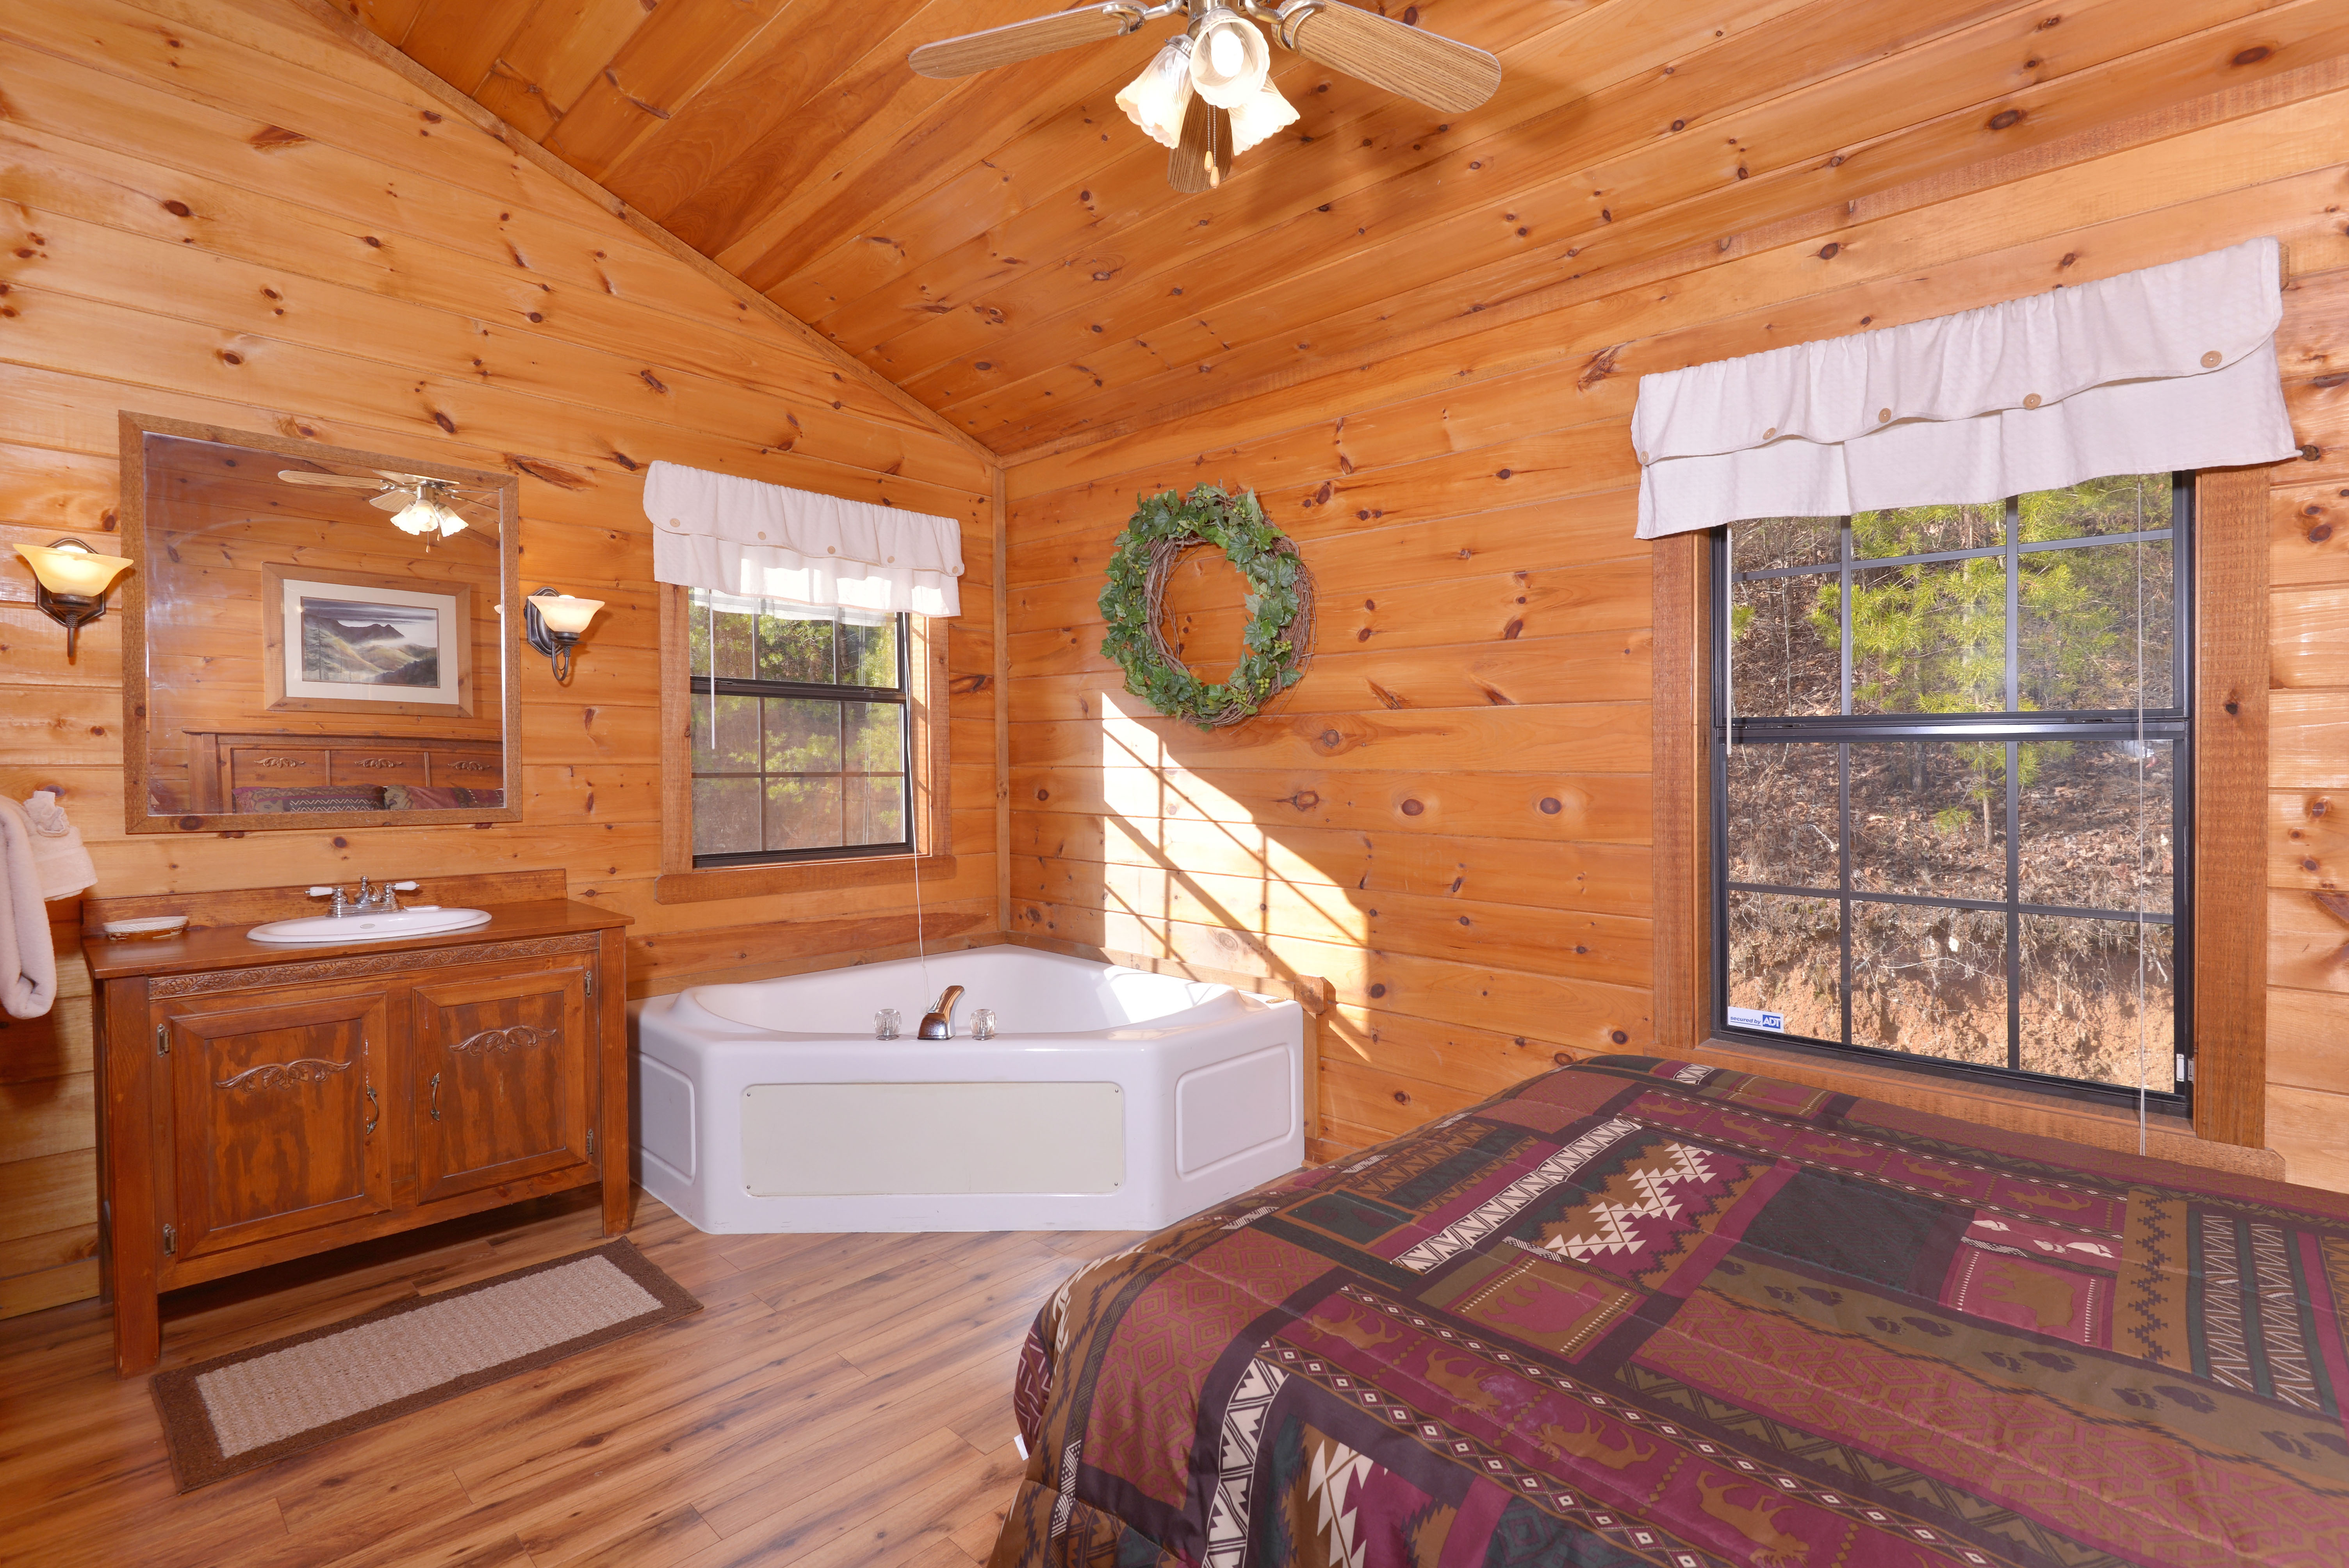 Bedroom Cabins In Pigeon Forge Tennessee : Pigeon Forge One Bedroom ...